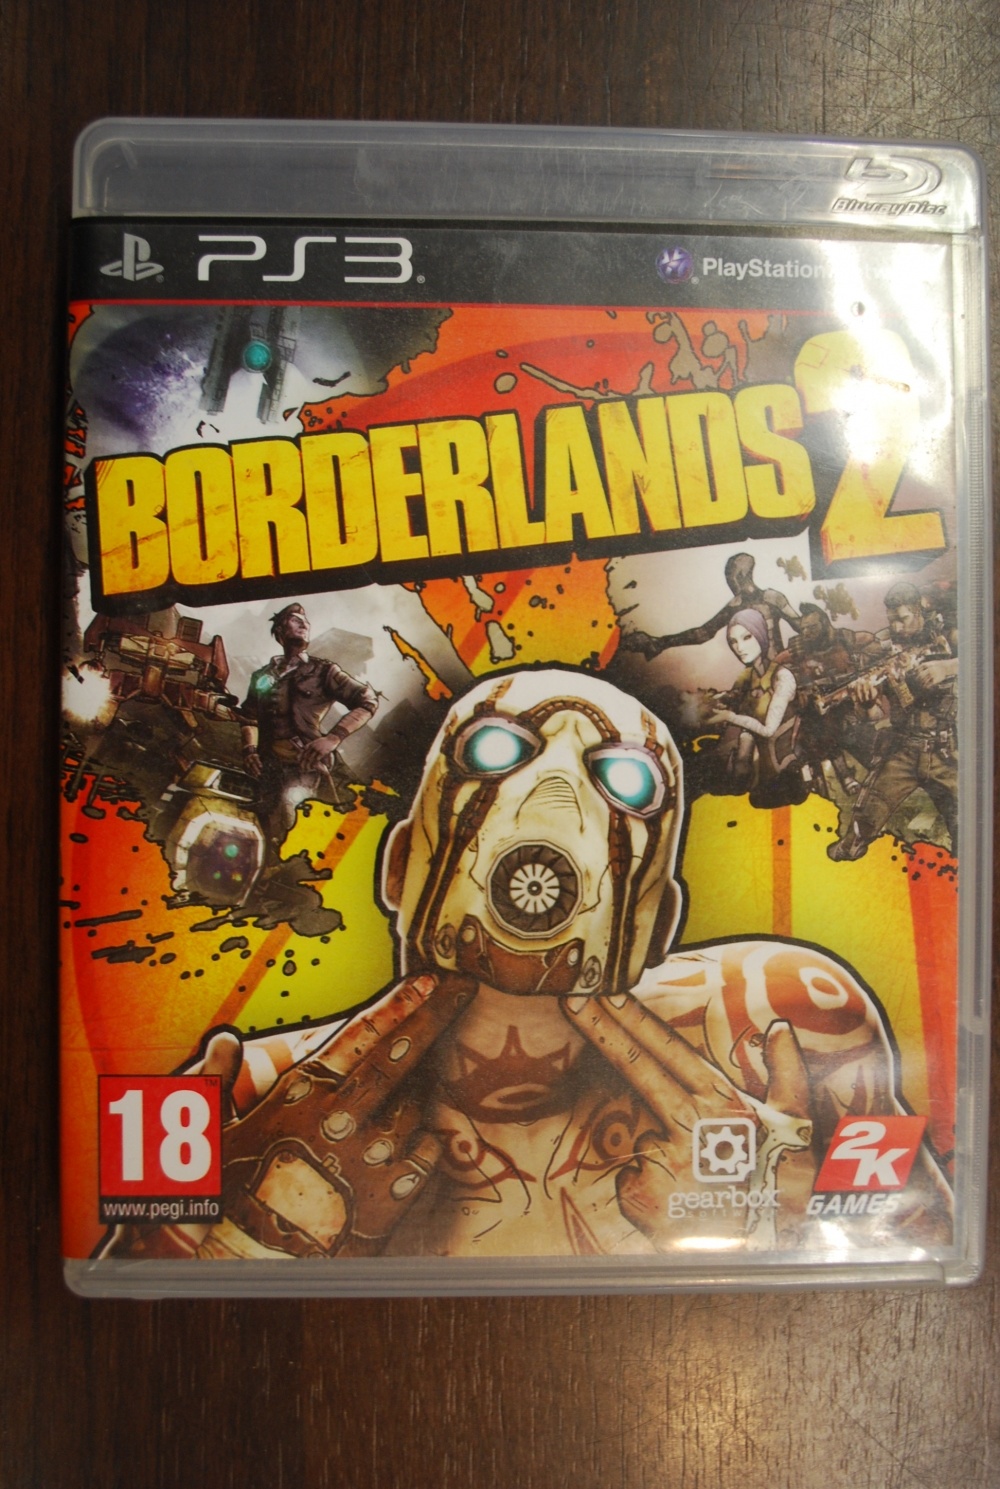 Sanders melk gebed PS3 Game Borderlands - Used Products Oss